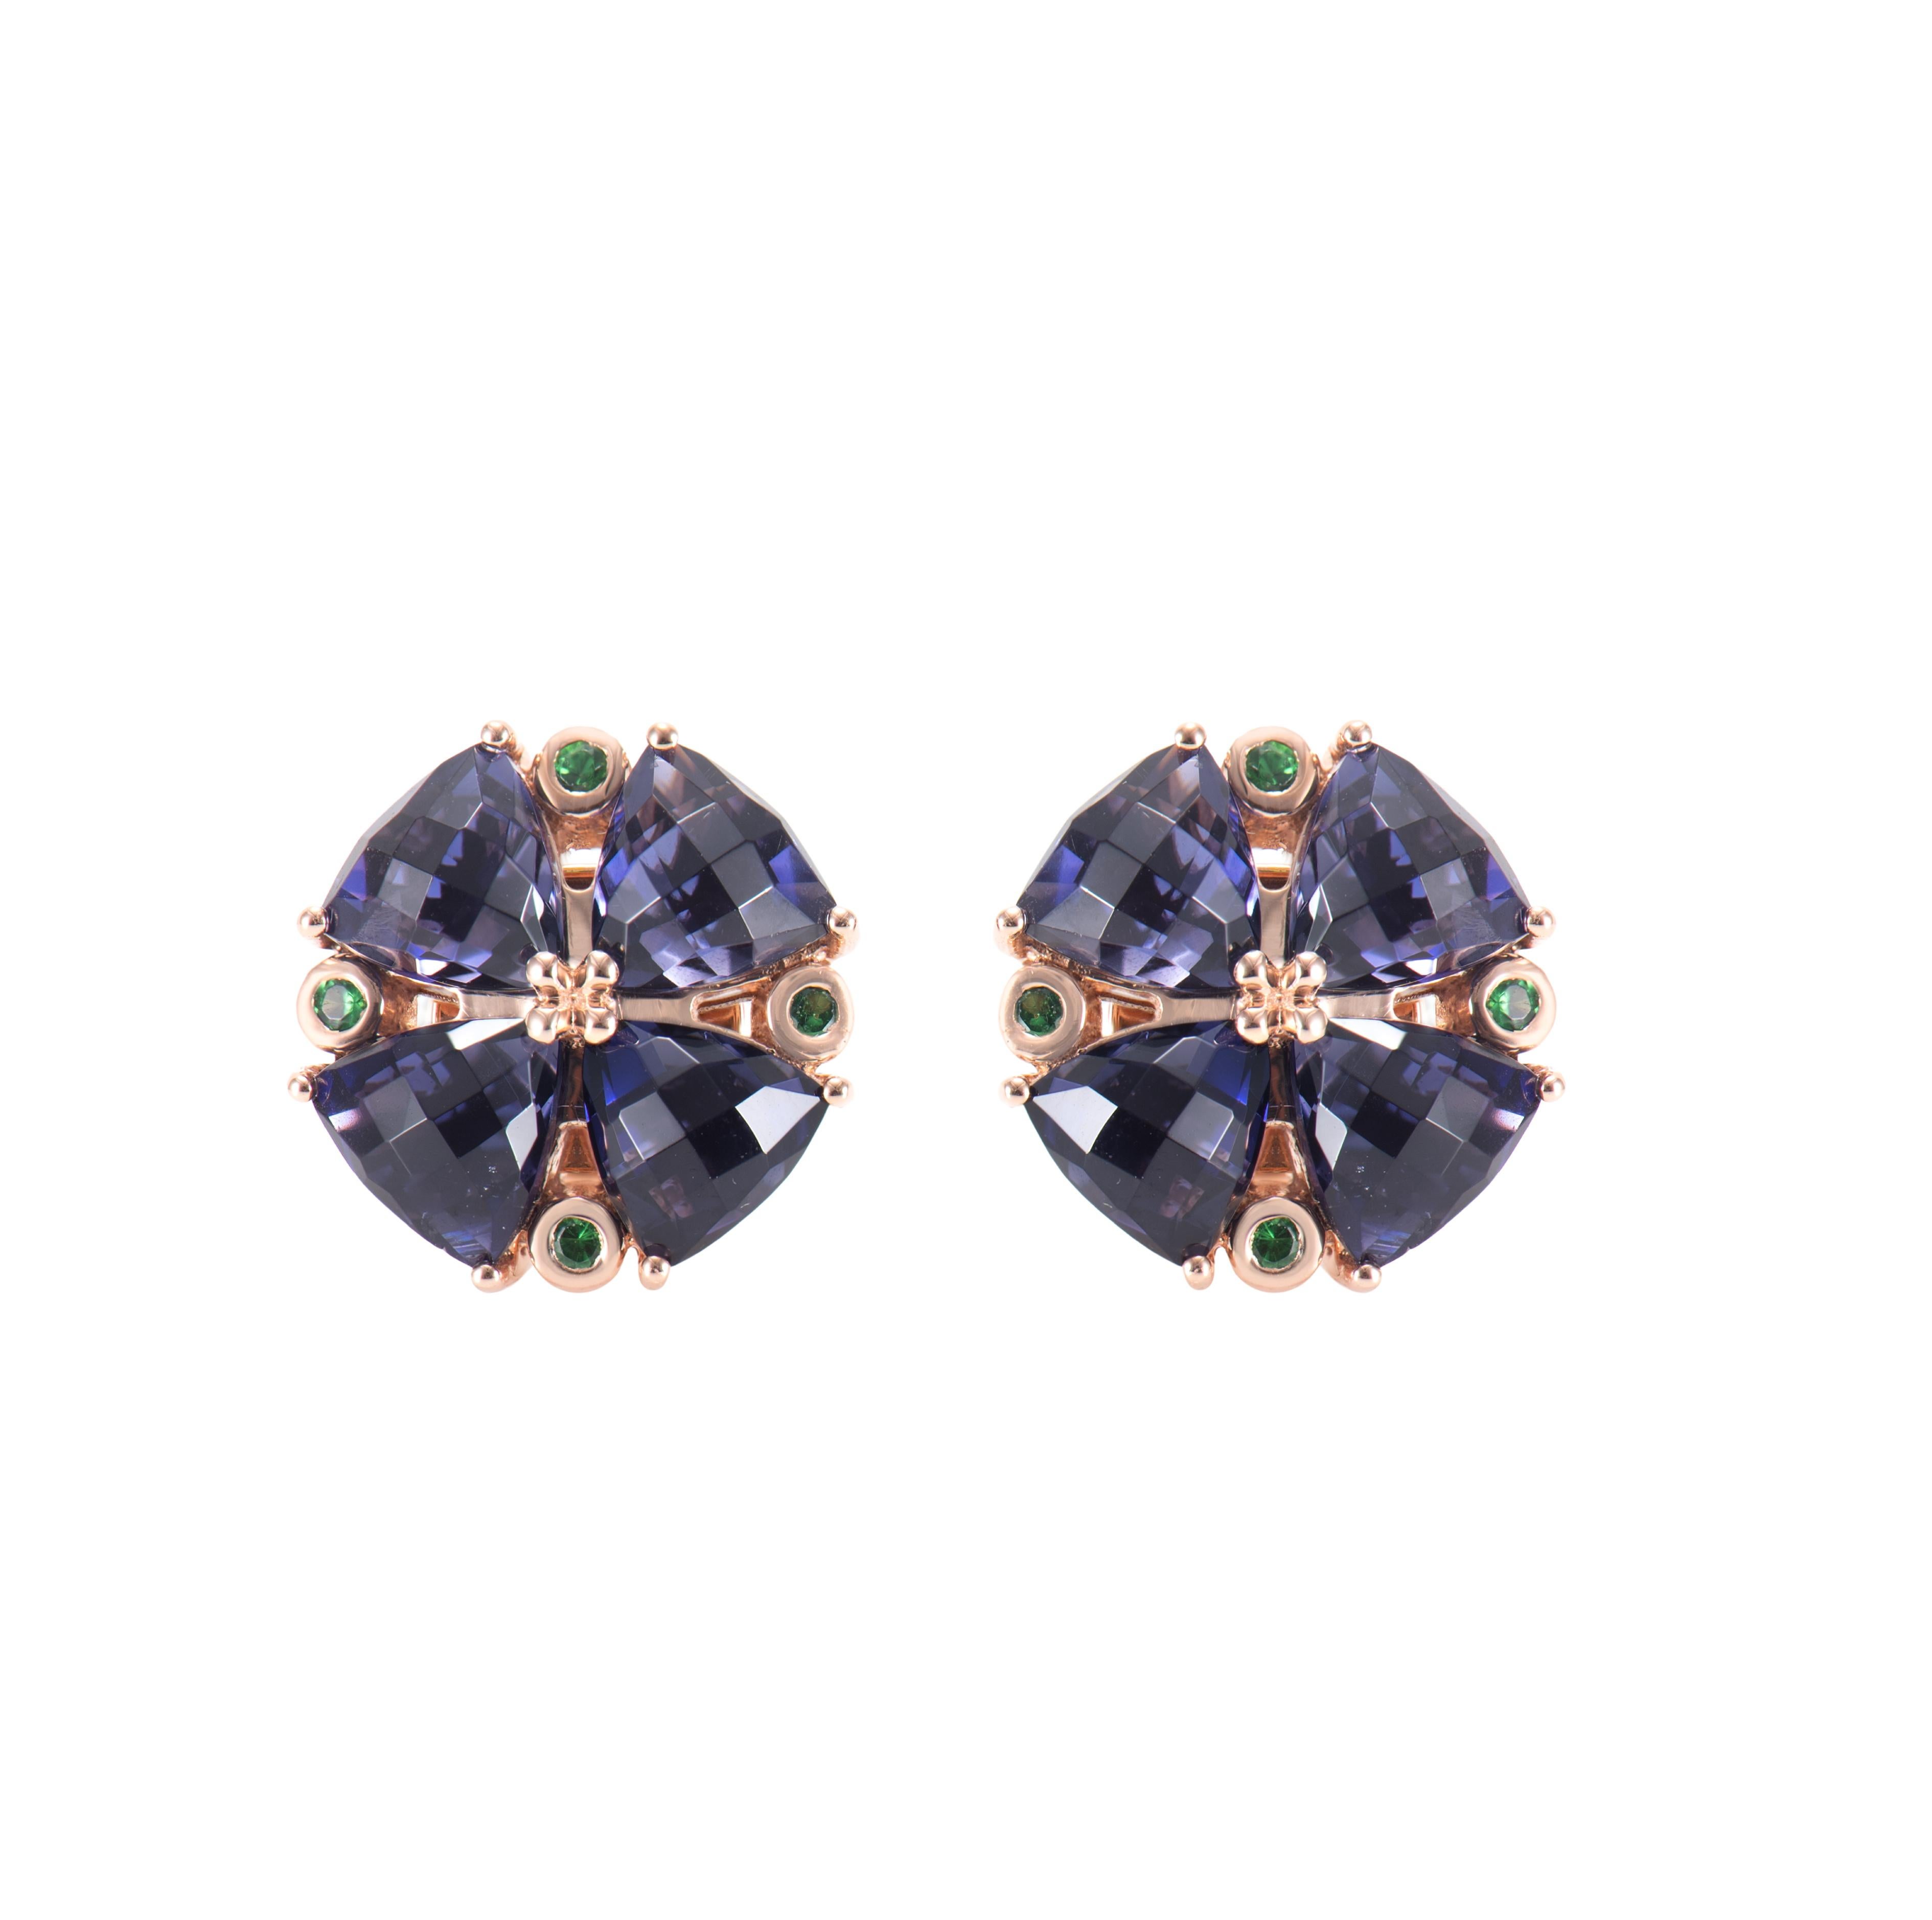 Contemporary 6.03 Carat Iolite Stud Earring in 18Karat Rose Gold with Tsavorite. For Sale